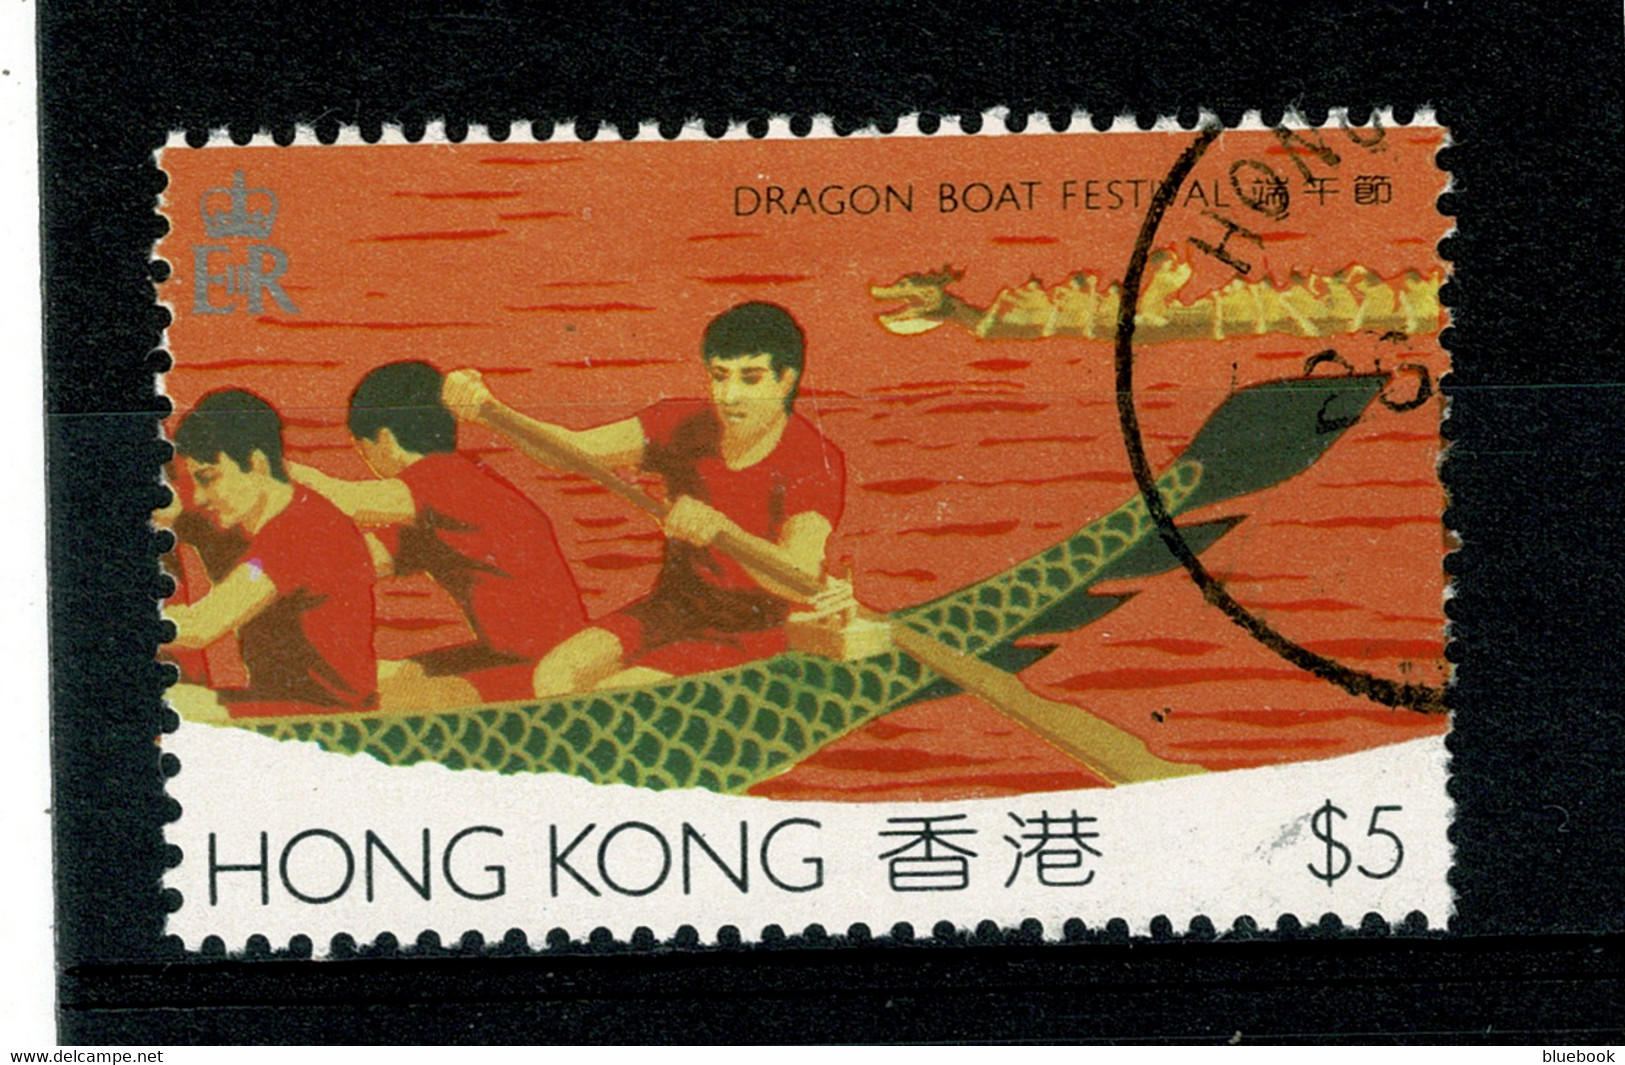 Ref 1401 -  1985 Hong Kong Dragon Boat Festival - $5 Fine Used Stamp SG 491 - Cat £11 + - Used Stamps